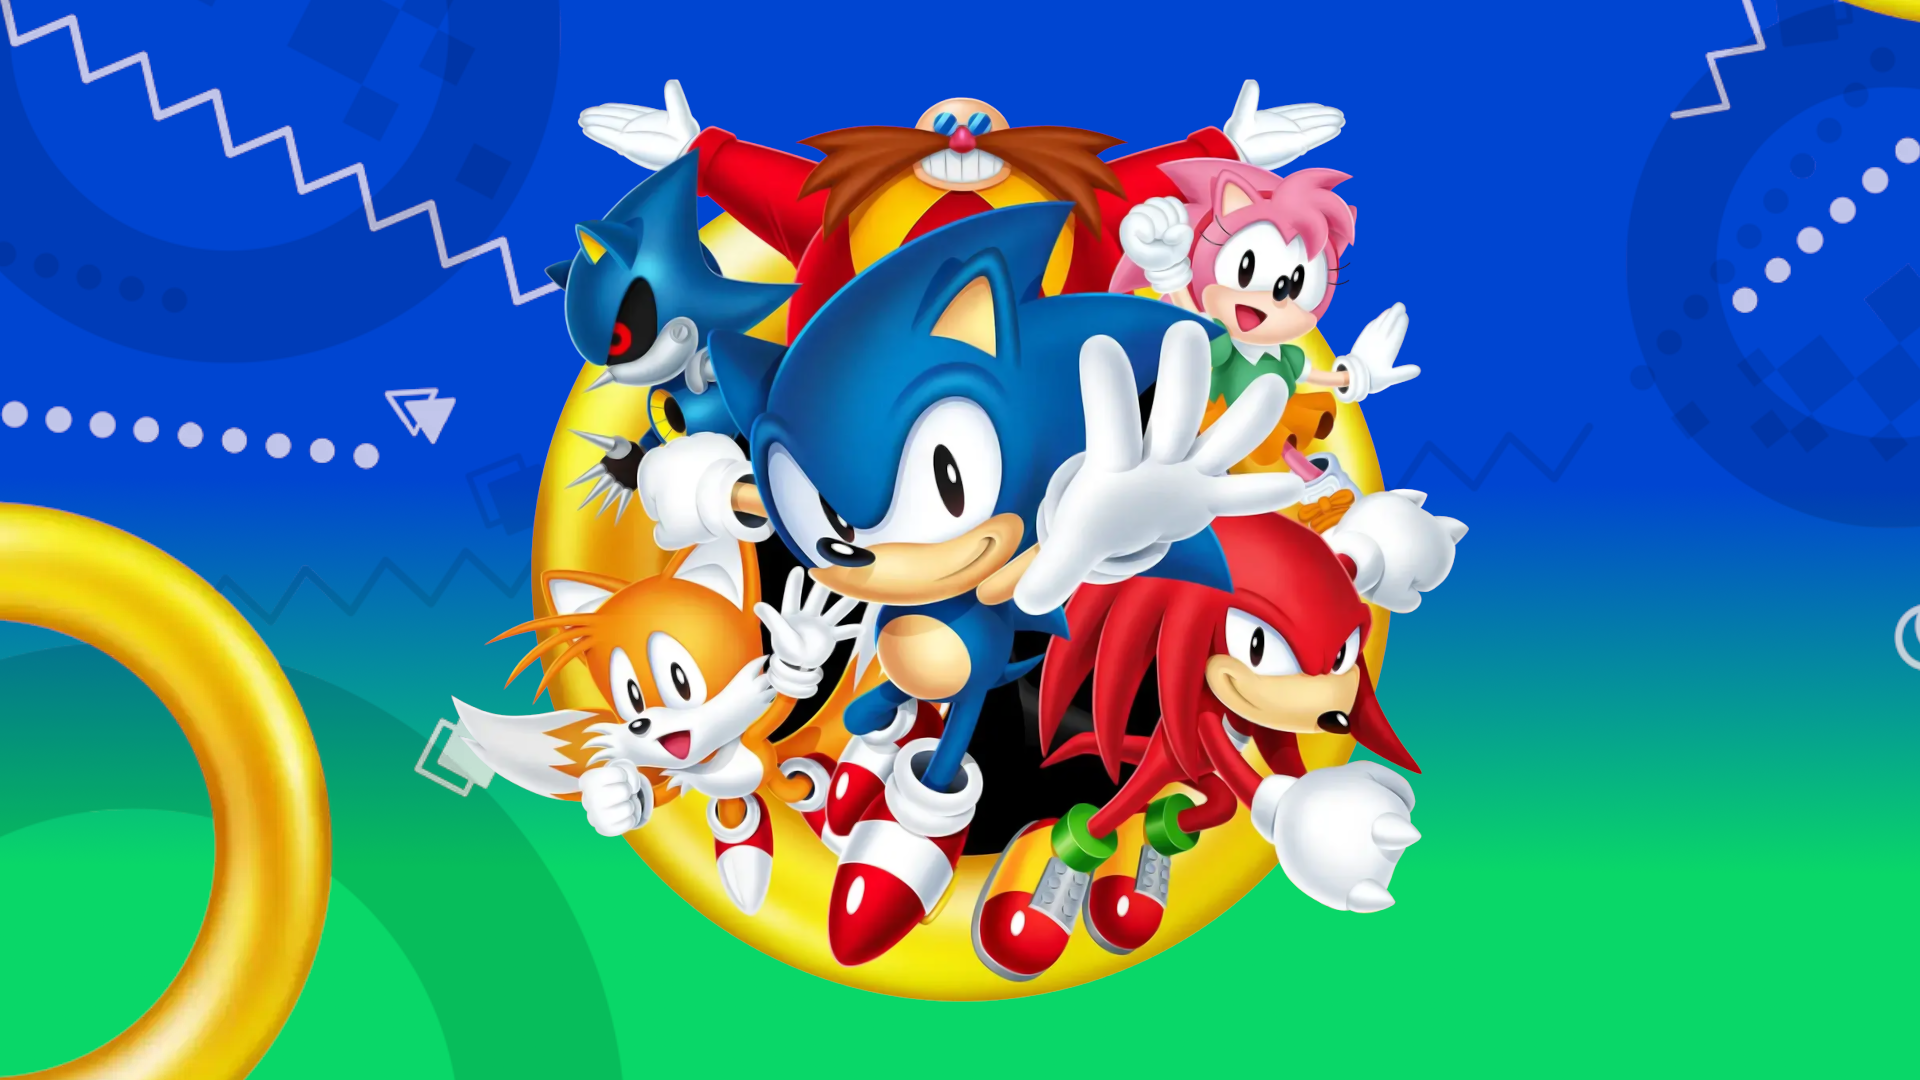 Sonic Sonic 2 Sonic 3 Sonic Origins Video Game Art Video Game Characters Tails Character Knuckles Eg 1920x1080